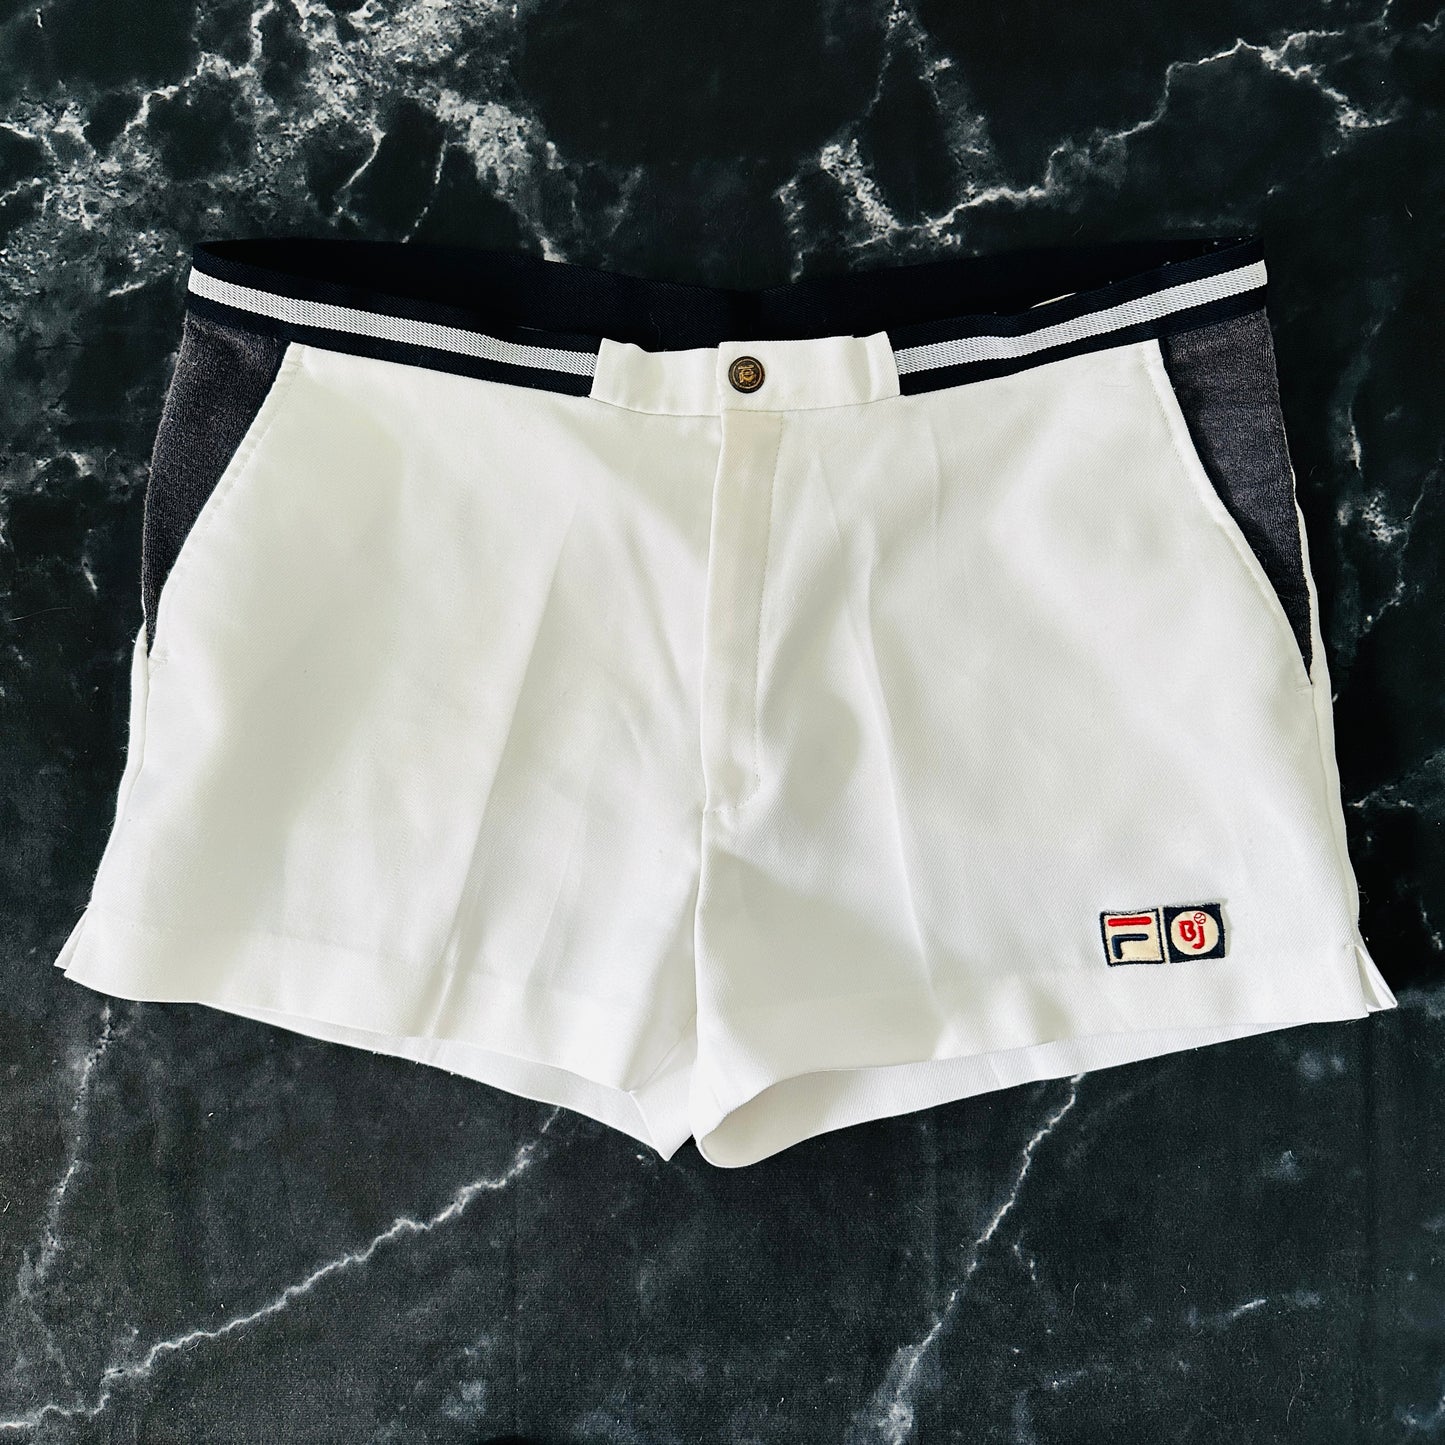 Fila Björn Borg 80s Vintage Tennis Shorts - 52 / L - Made in Italy